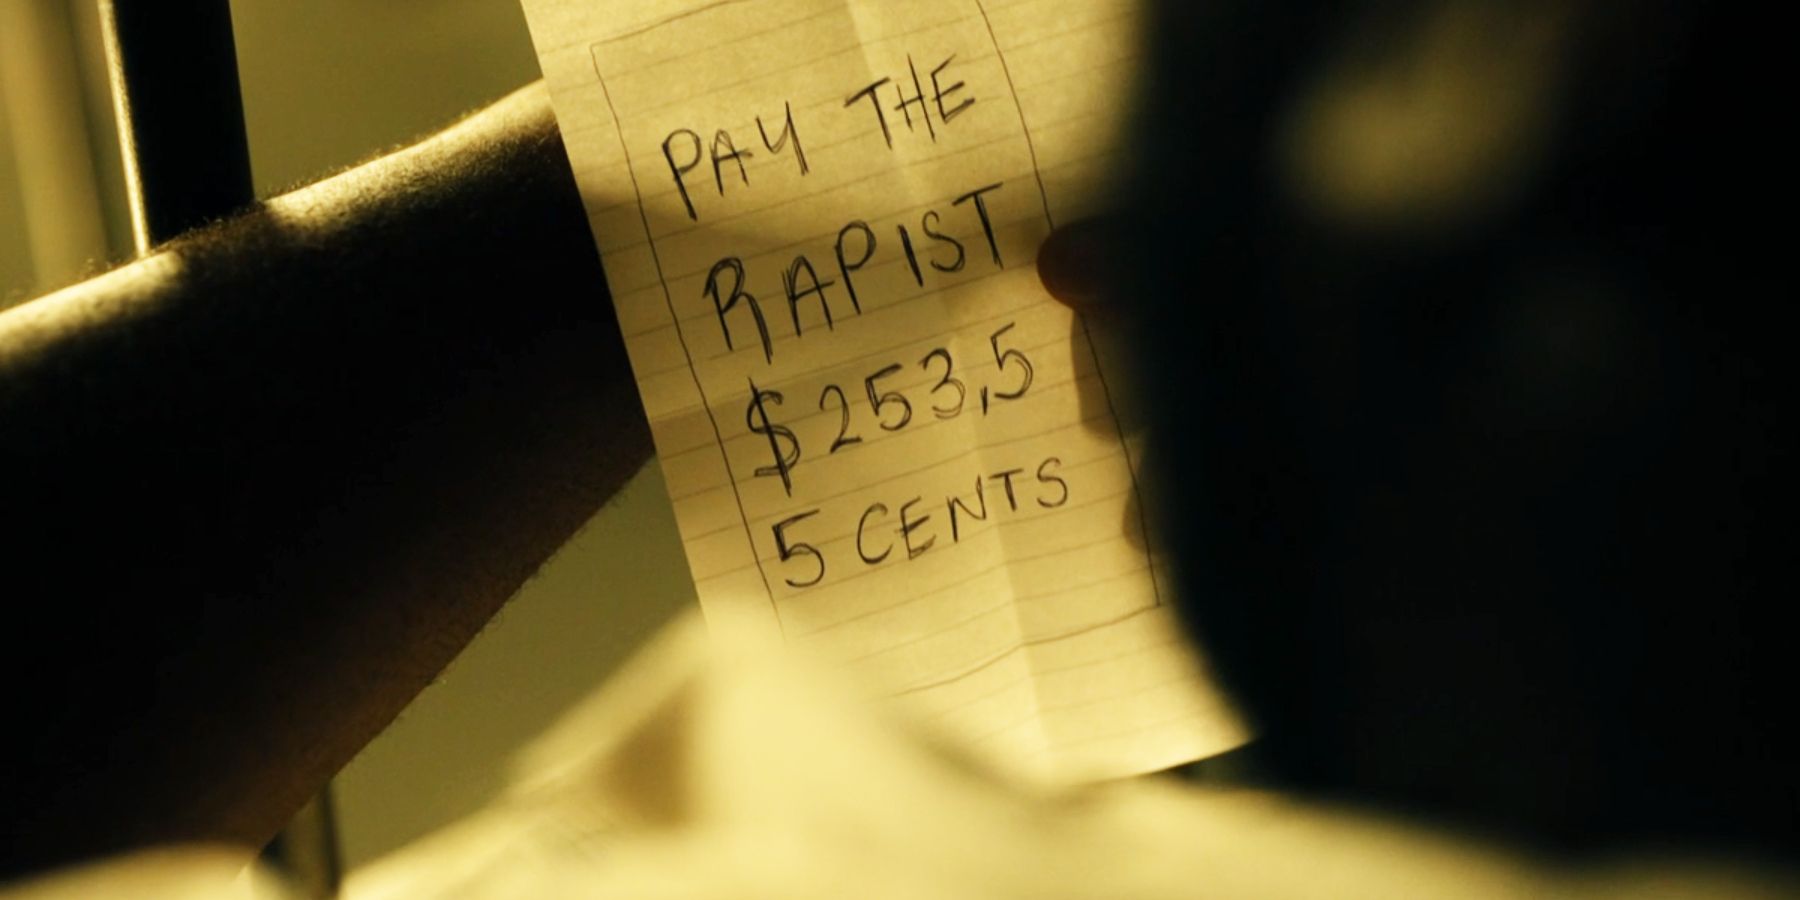 The solution to Inside Man's 253 dollars 55 cents mystery is written on a piece of lined paper that says "pay the rapist $253,55 cents"